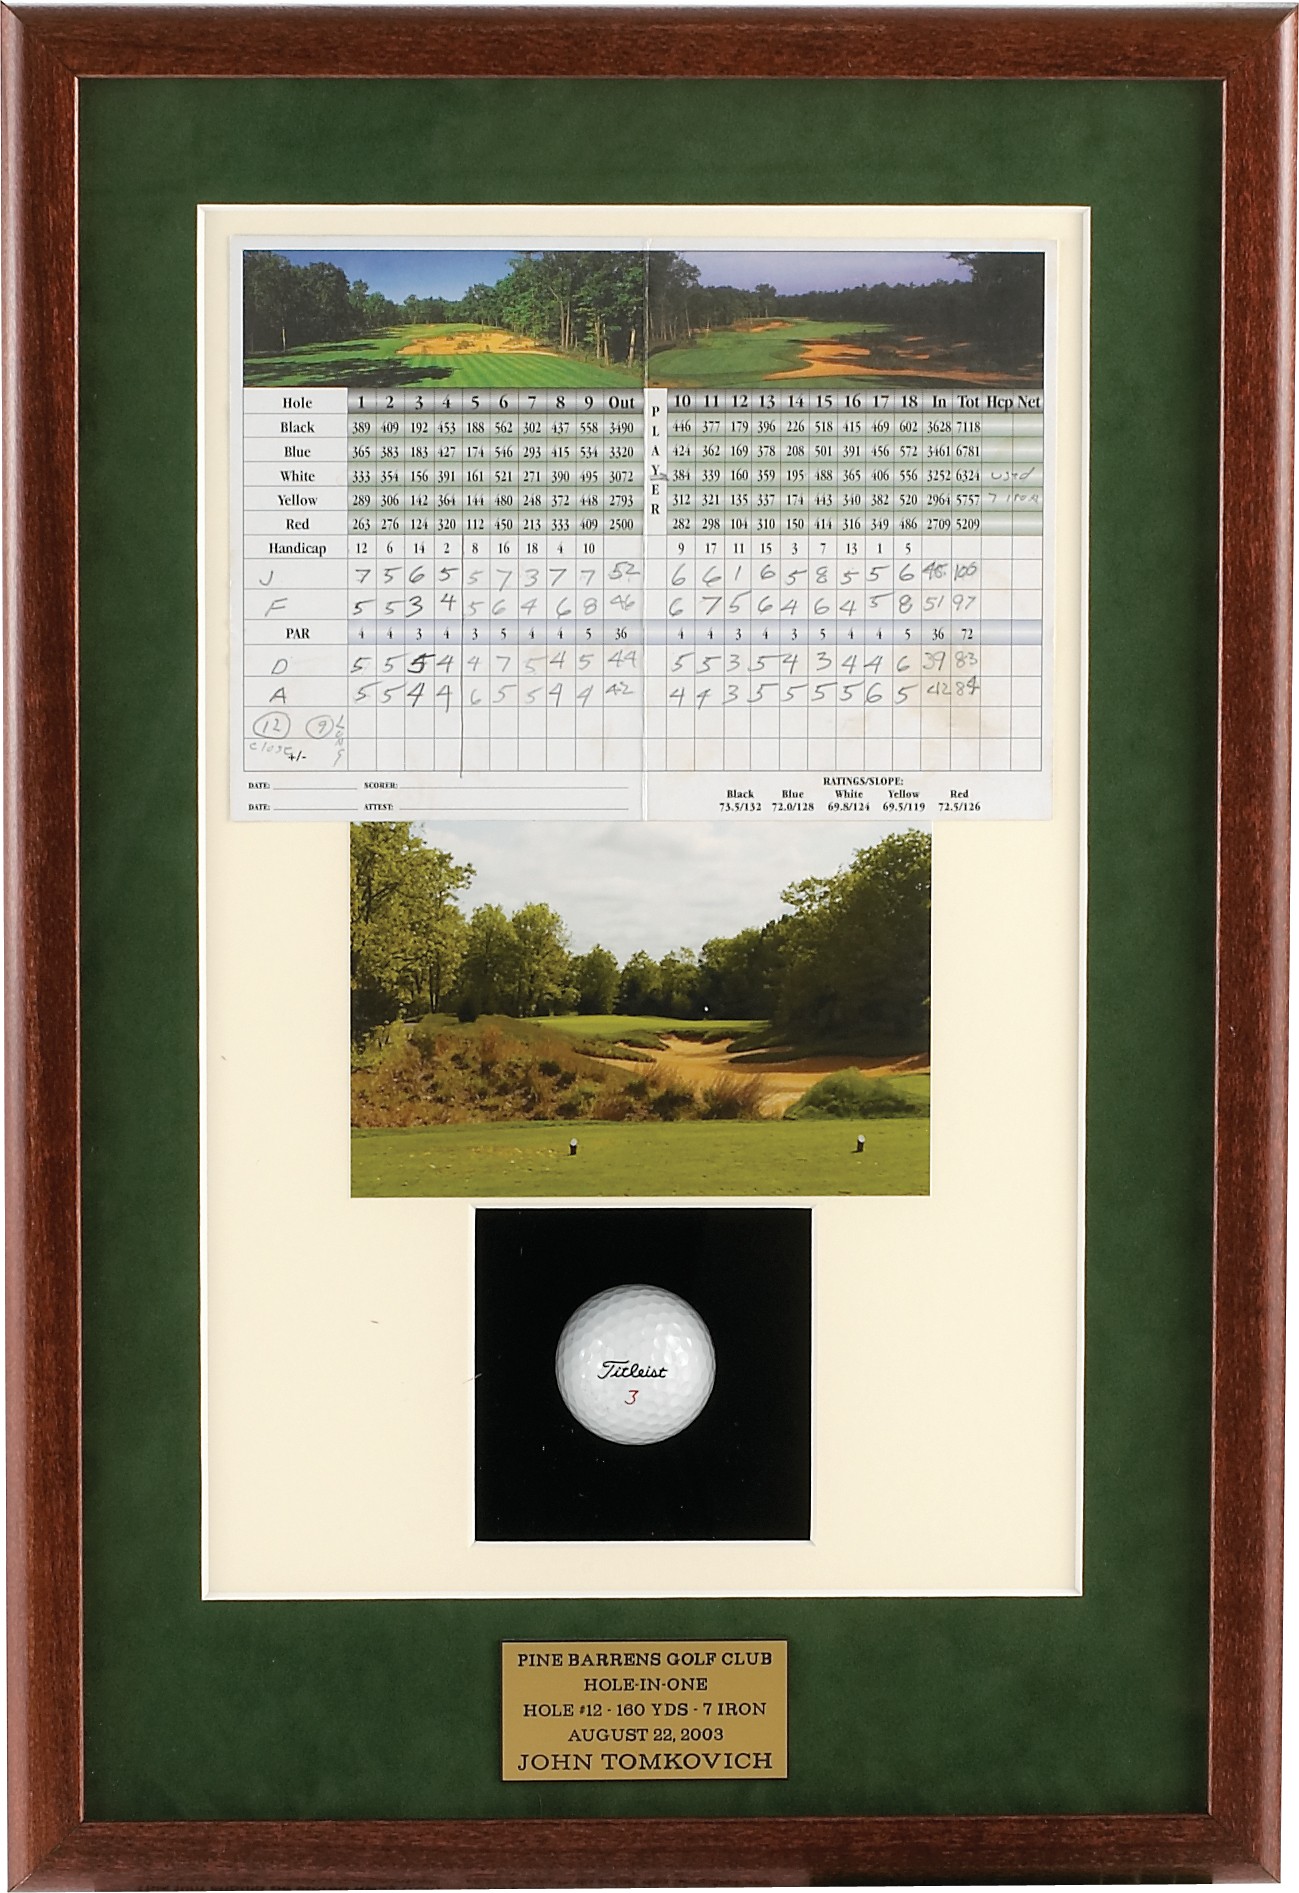 Rosewood hole-in-one shadow box-holds photo, ball and scorecard